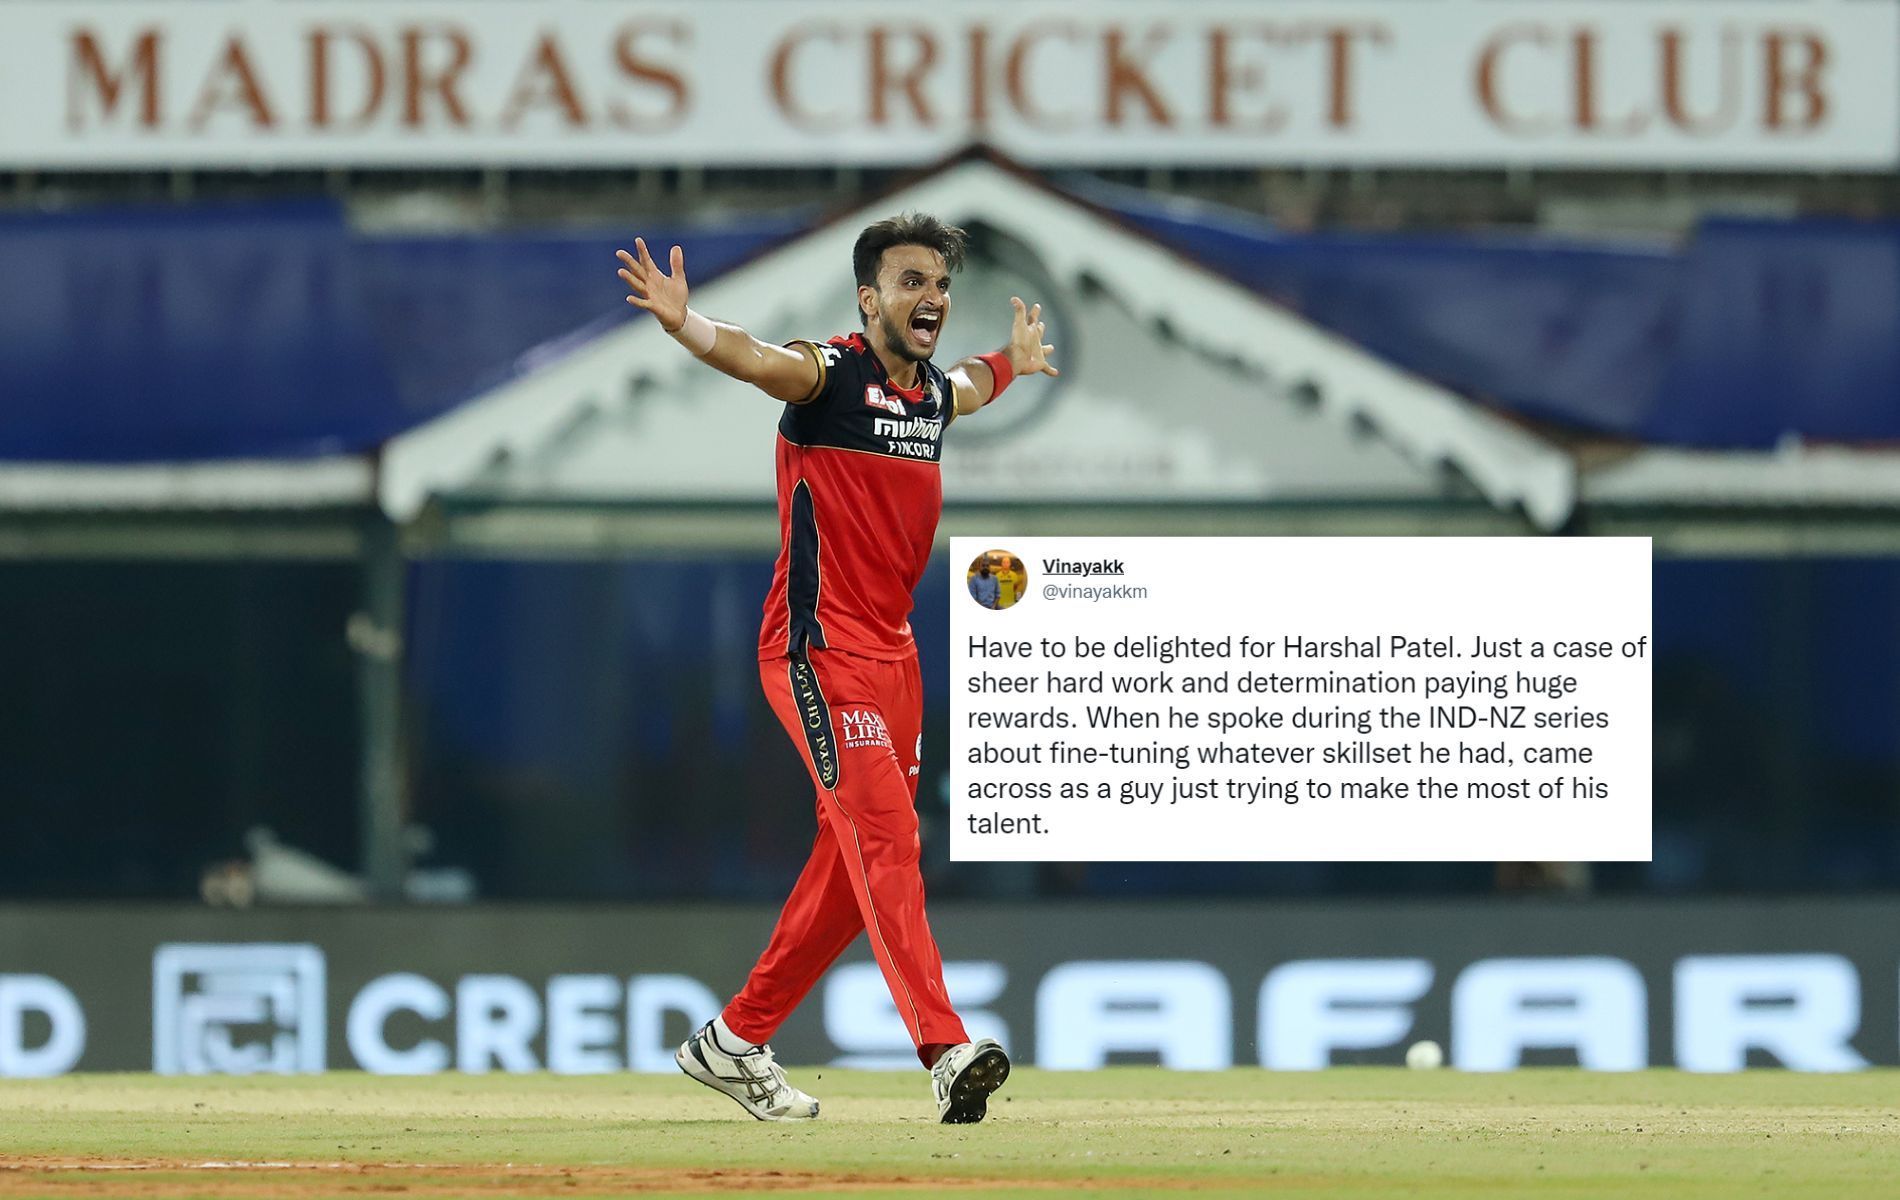 Harshal Patel will return to RCB after being snapped up them for a massive sum in the IPL 2022 auction.